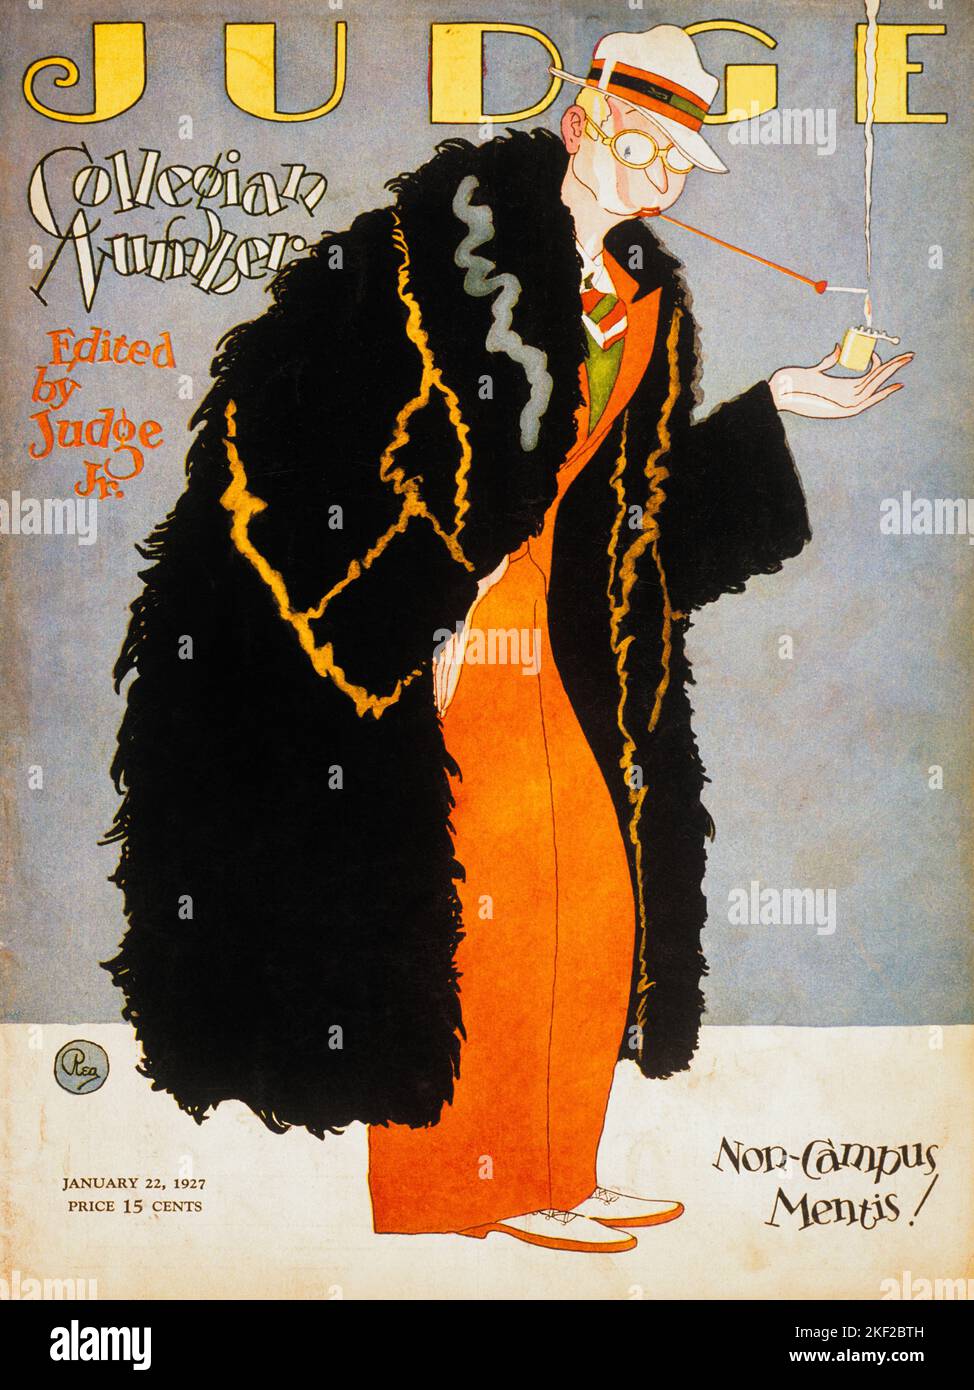 1920s COLLEGE EDITION JUDGE MAGAZINE COMIC DEPICTION OF FASHIONABLE COLLEGIAN IN FUR COAT SMOKING CIGARETTE NON-CAMPUS MENTIS - kh13584 NAW001 HARS STYLISH COLLEGES CIGARETTE HOLDER LIGHTER EDITION FASHIONS RACCOON COAT SATIRE OLD FASHIONED Stock Photo